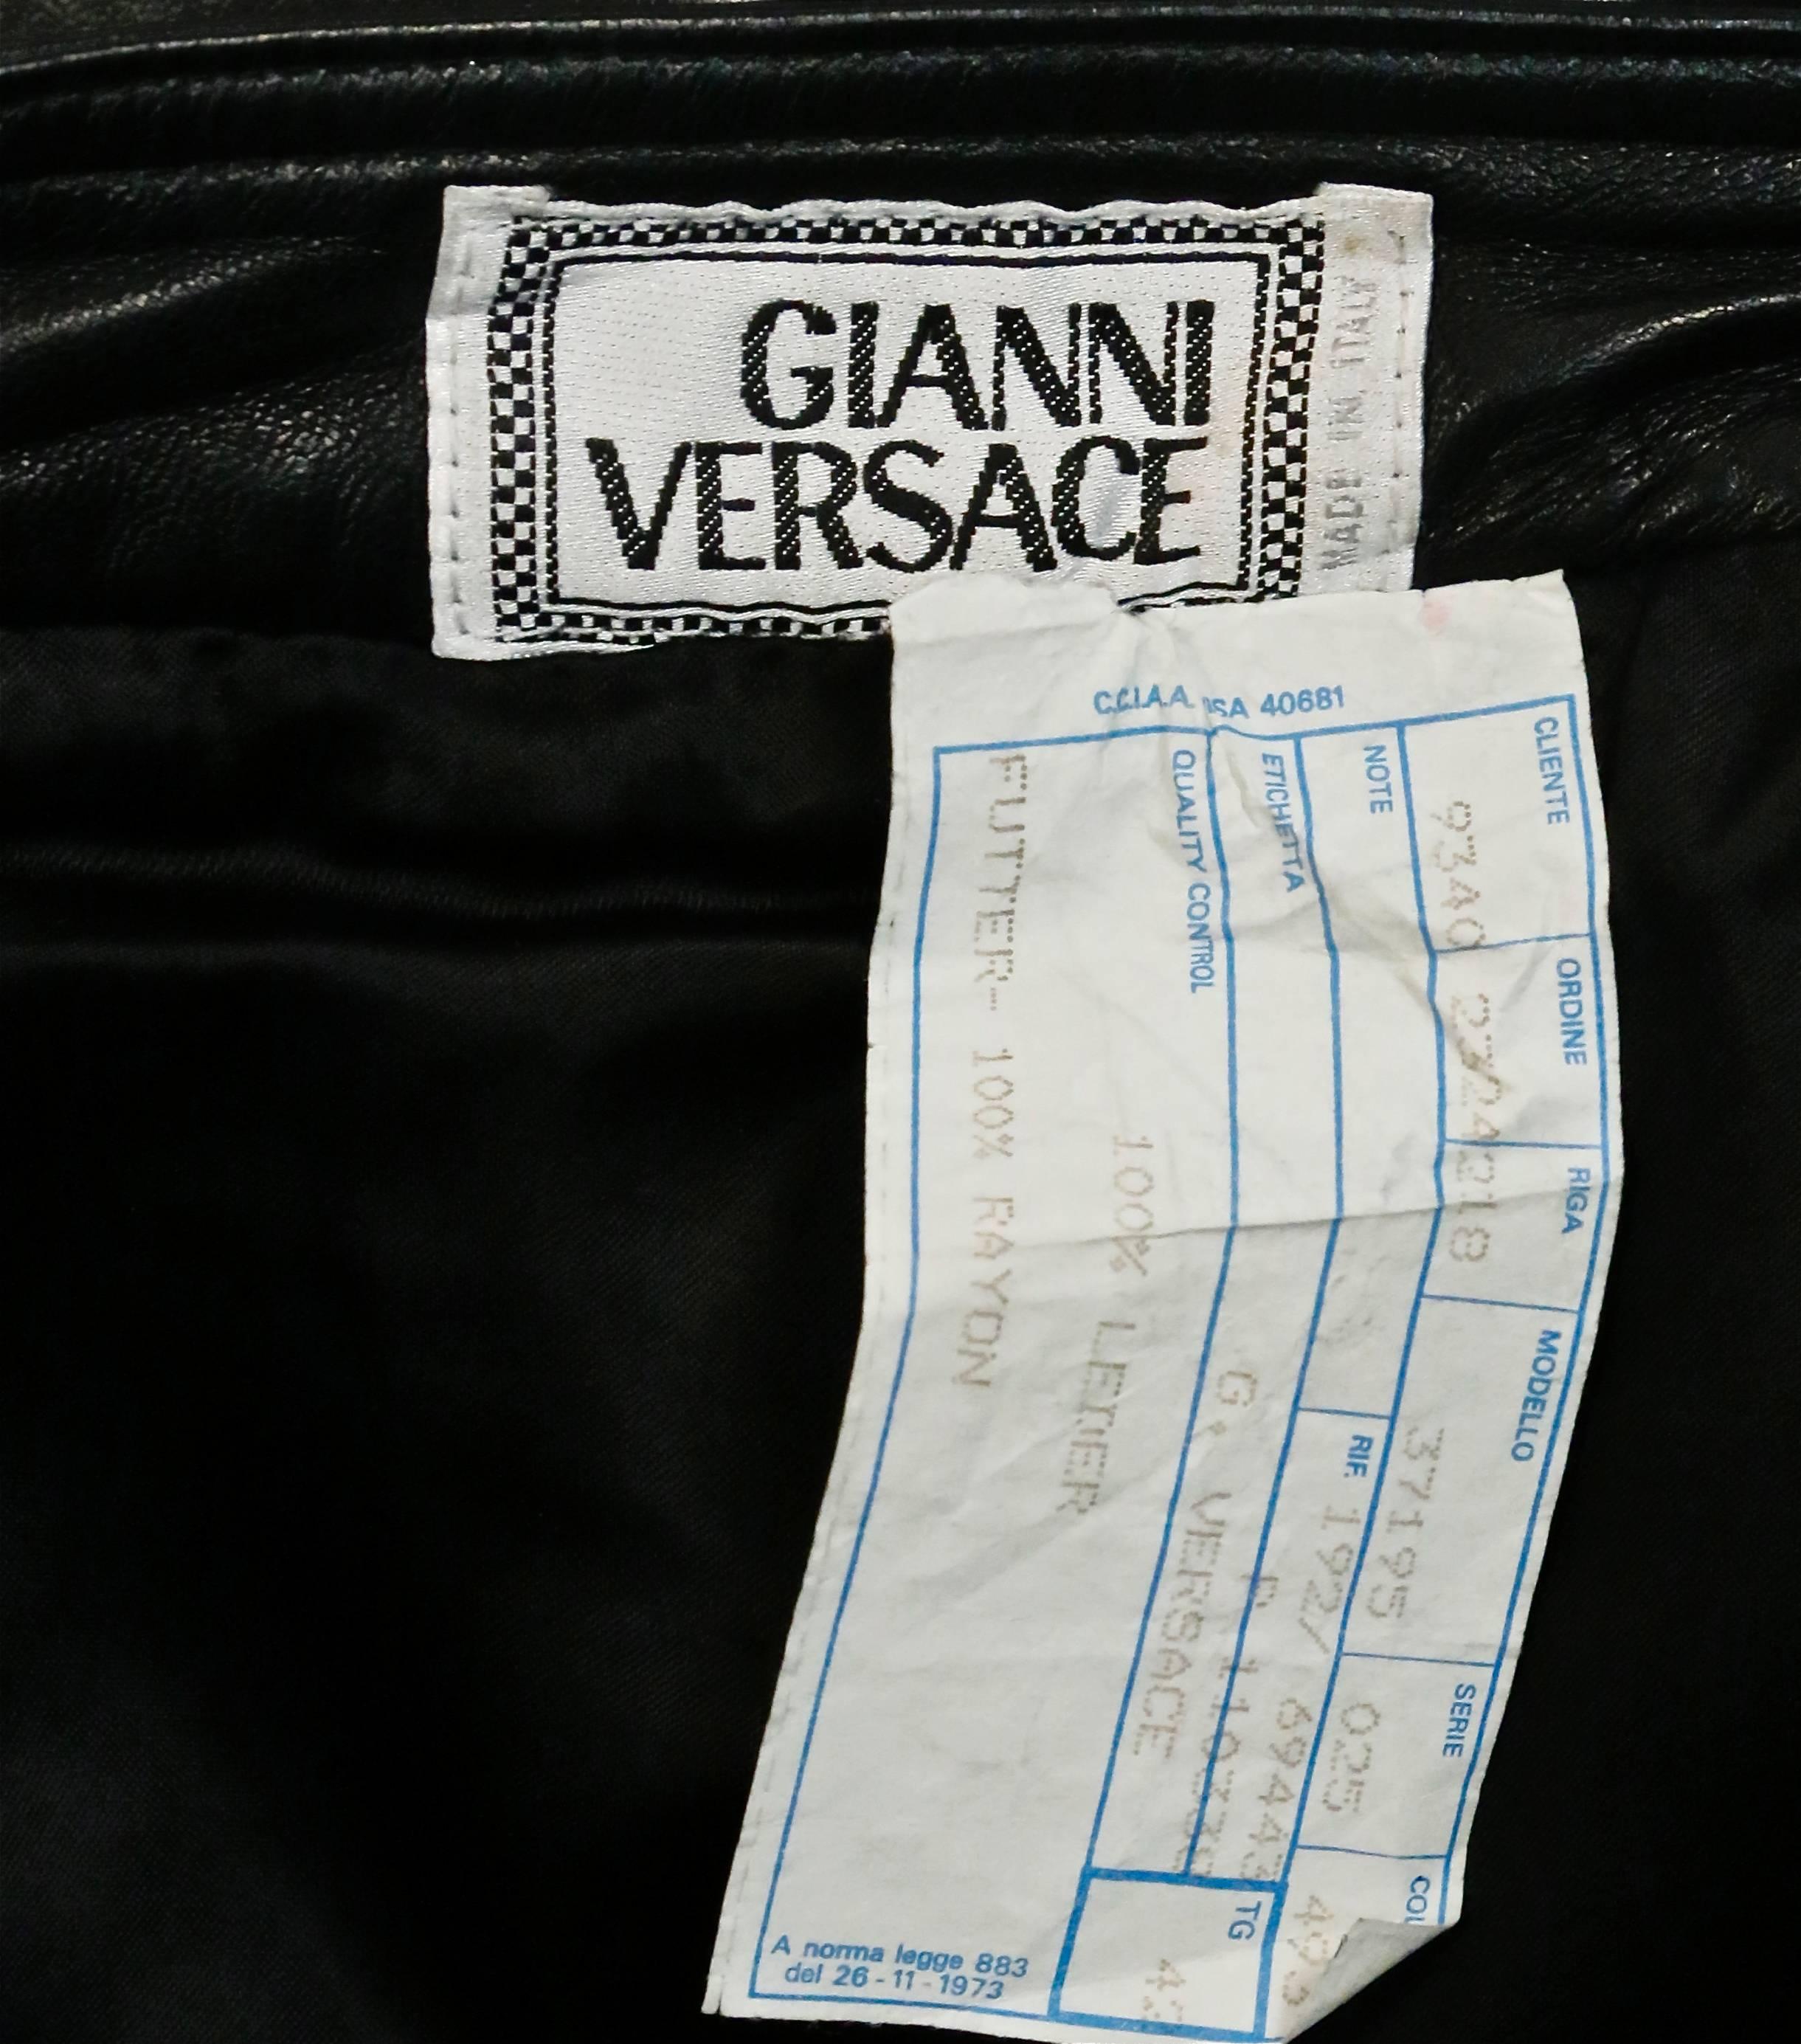 Black Iconic GIANNI VERSACE Bondage Harness silk blouse and leather skirt Fall 1992